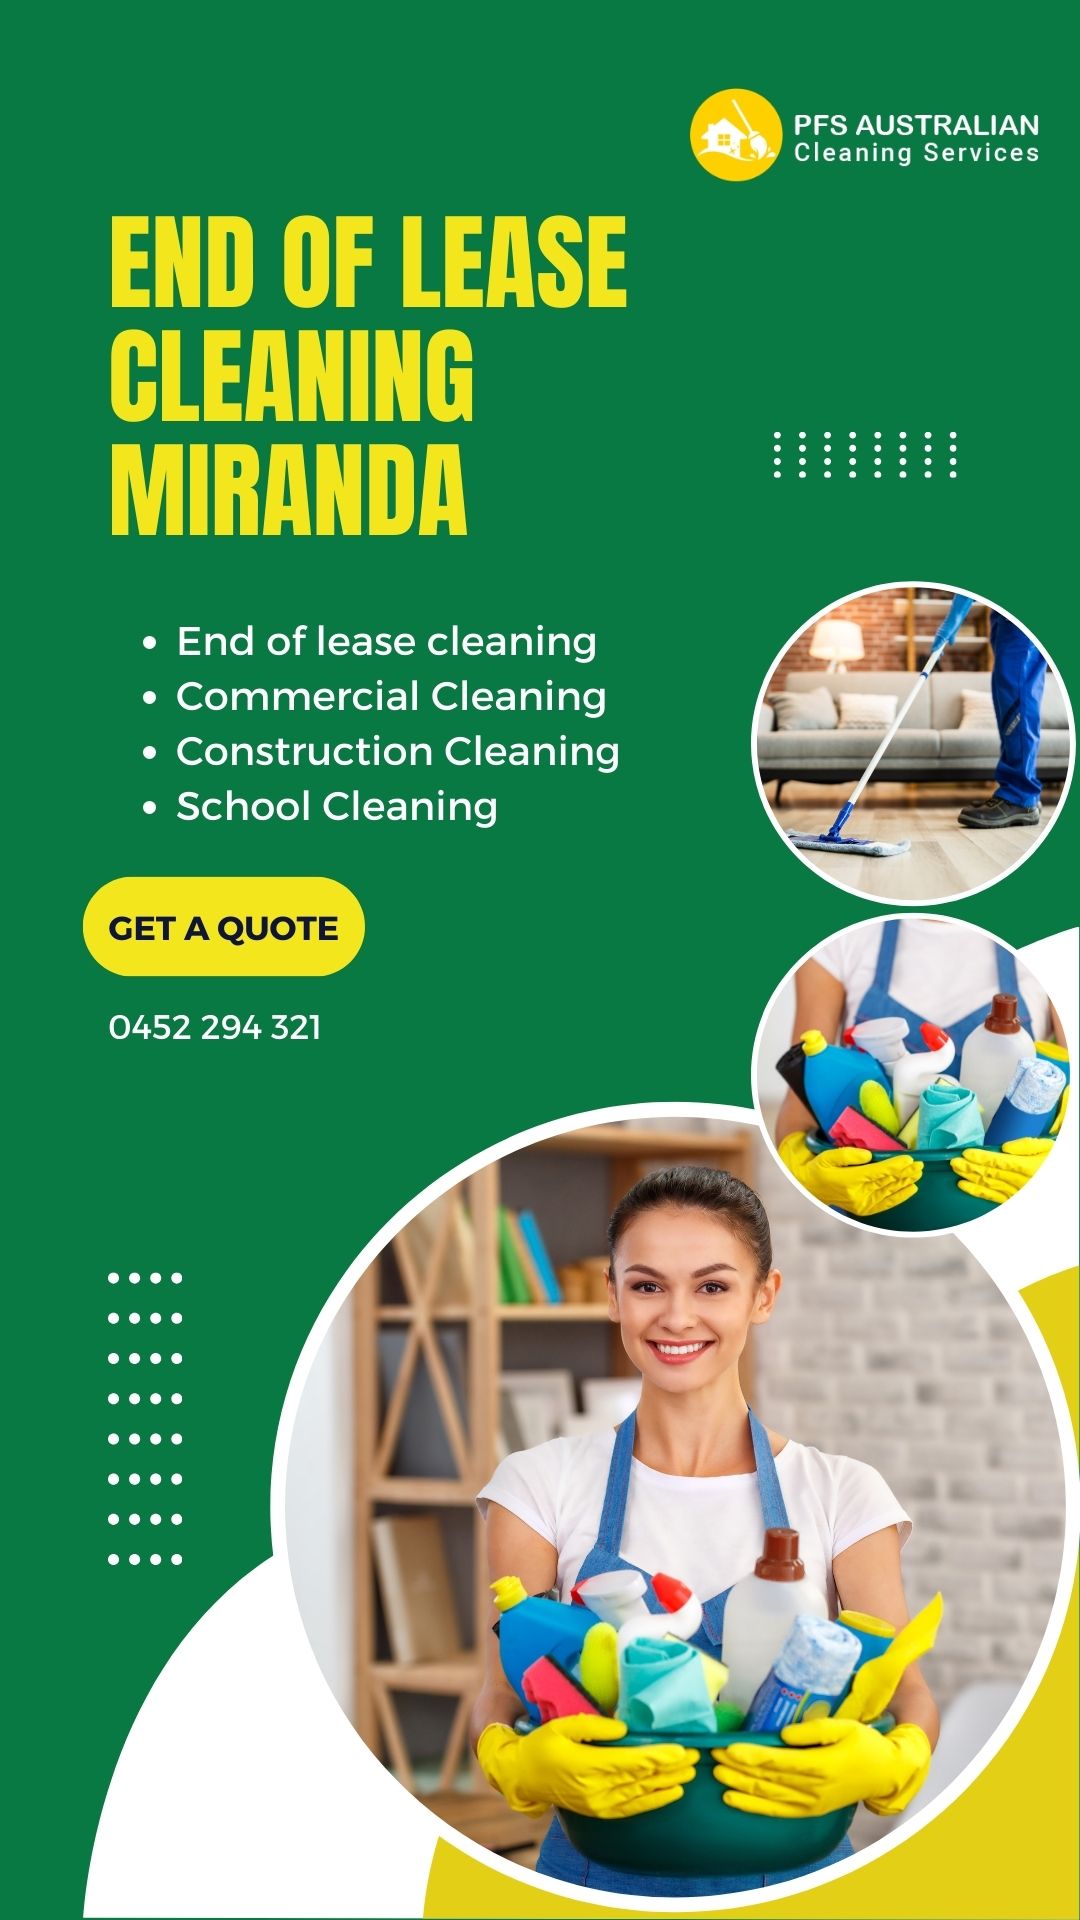 End of lease cleaning miranda, sydney